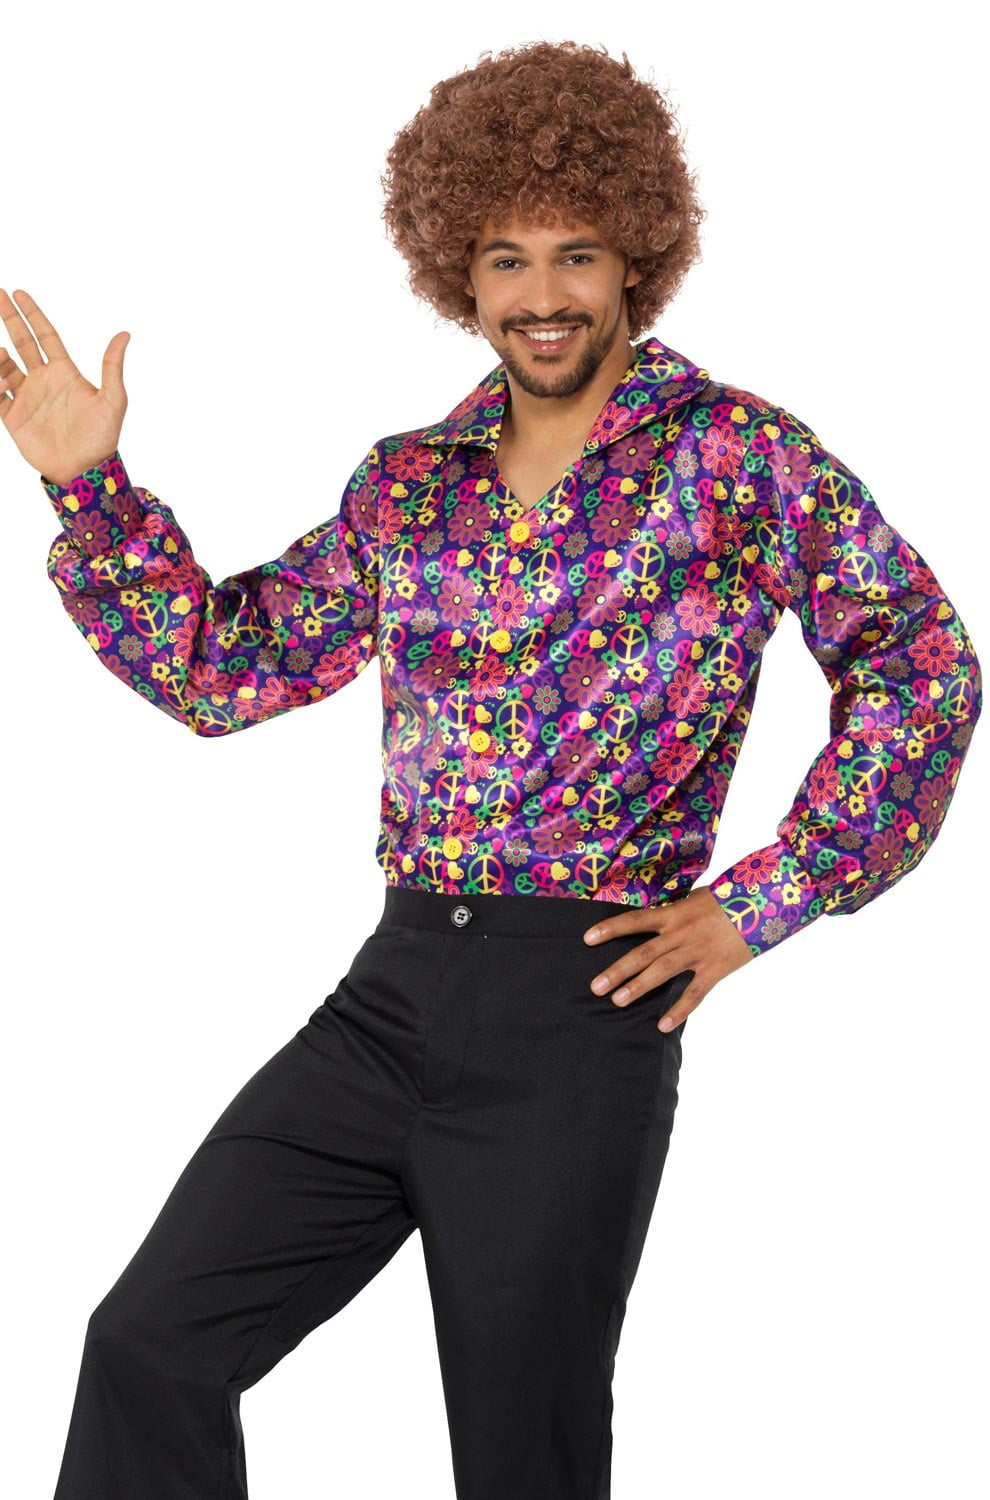 60s 70s Groovier Dancer Costume Fancy Dress Disco Mens Outfit New by Smiffys 